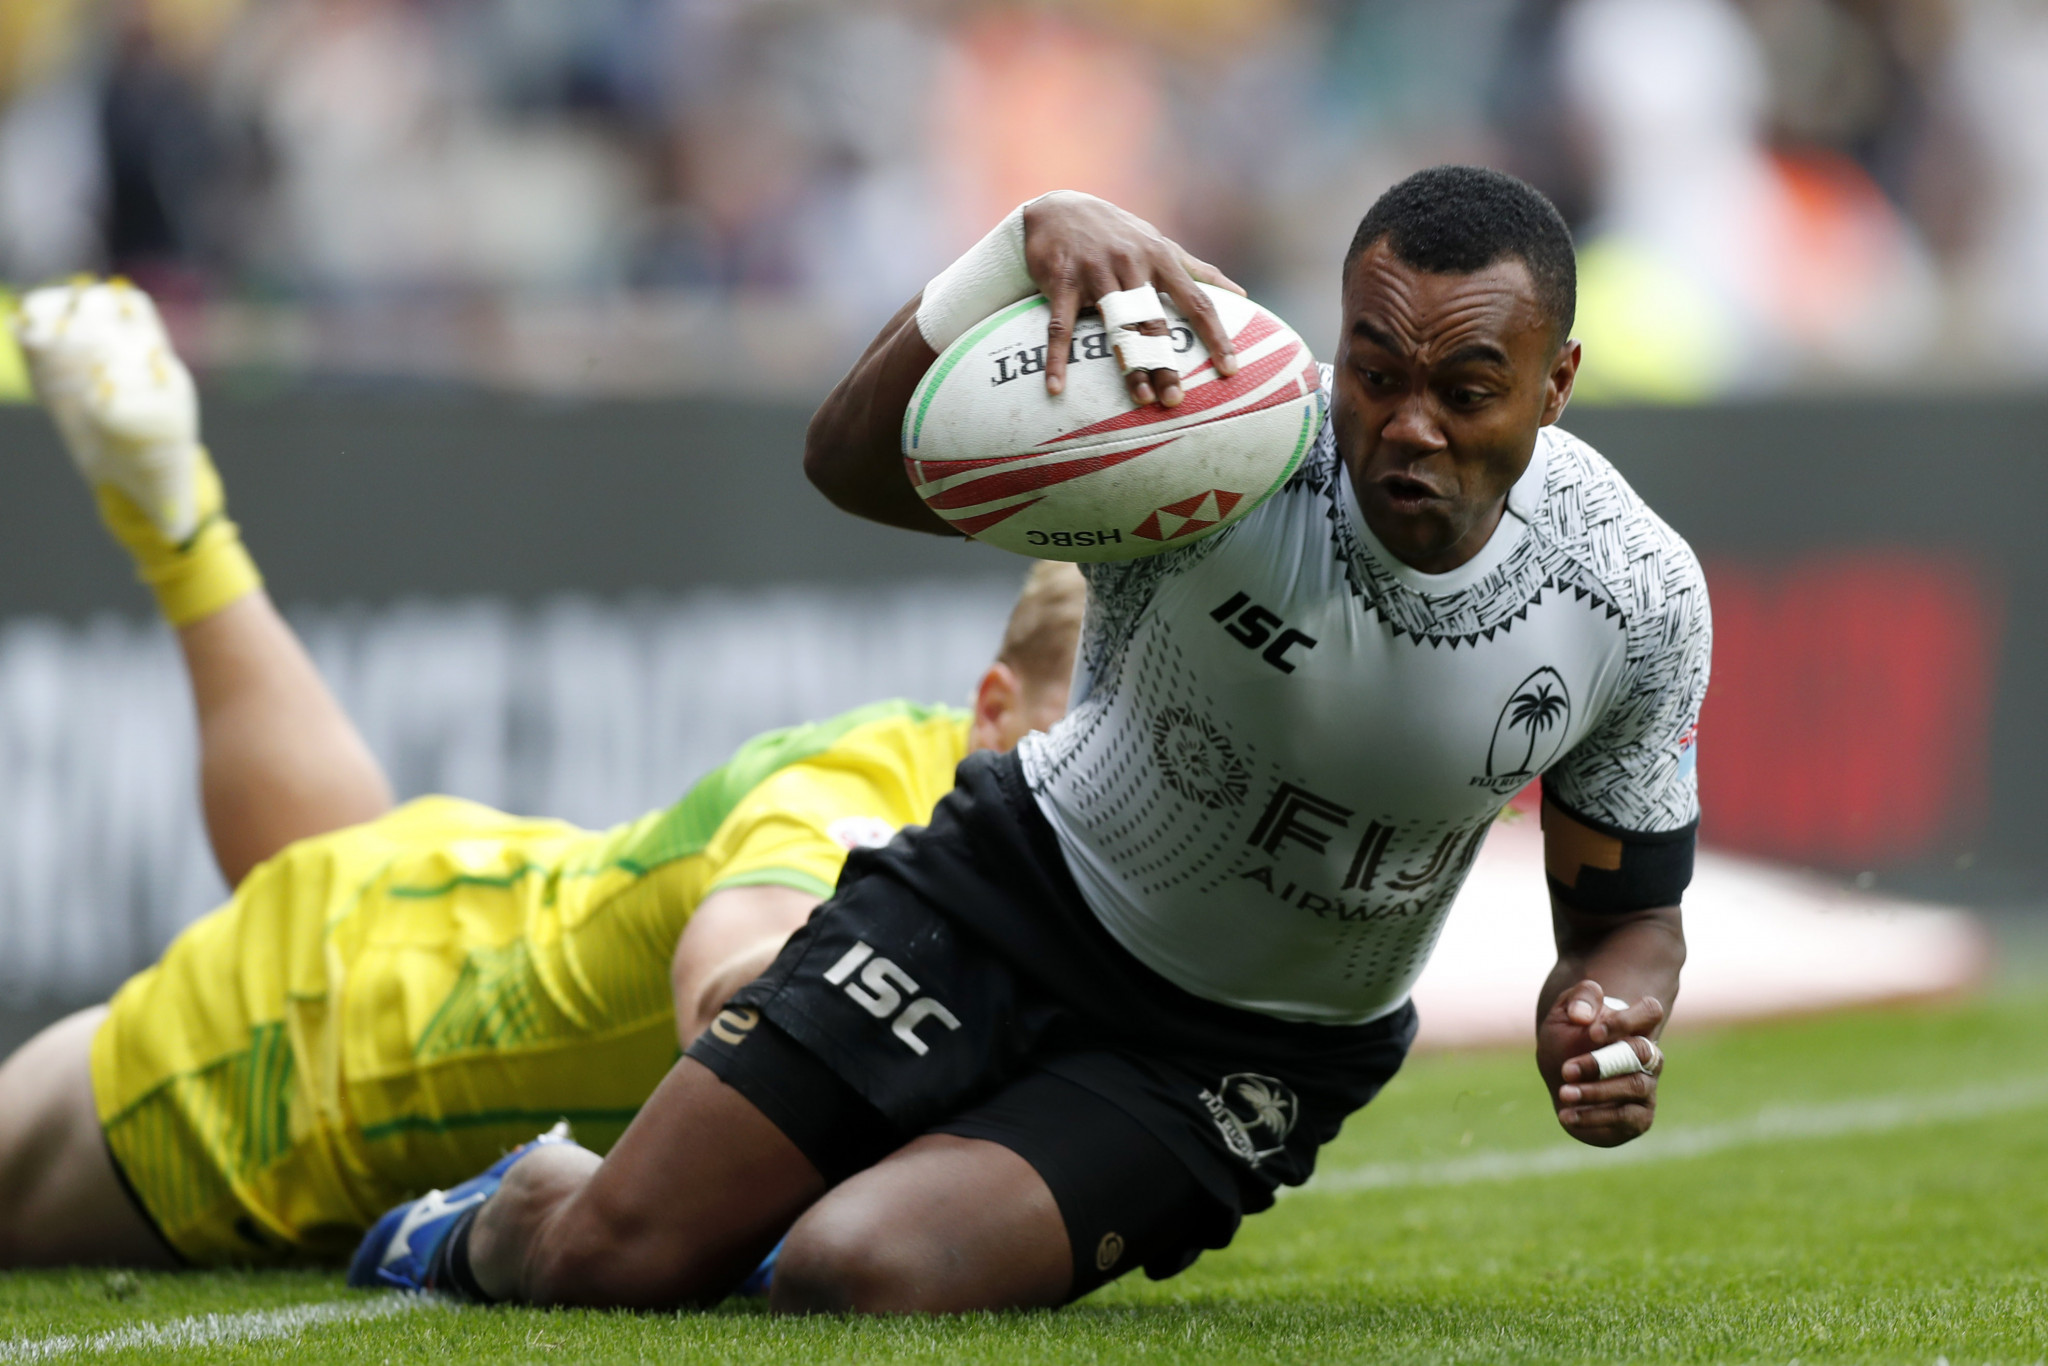 World Rugby Sevens Series tournaments in Paris and London have been postponed ©Getty Images